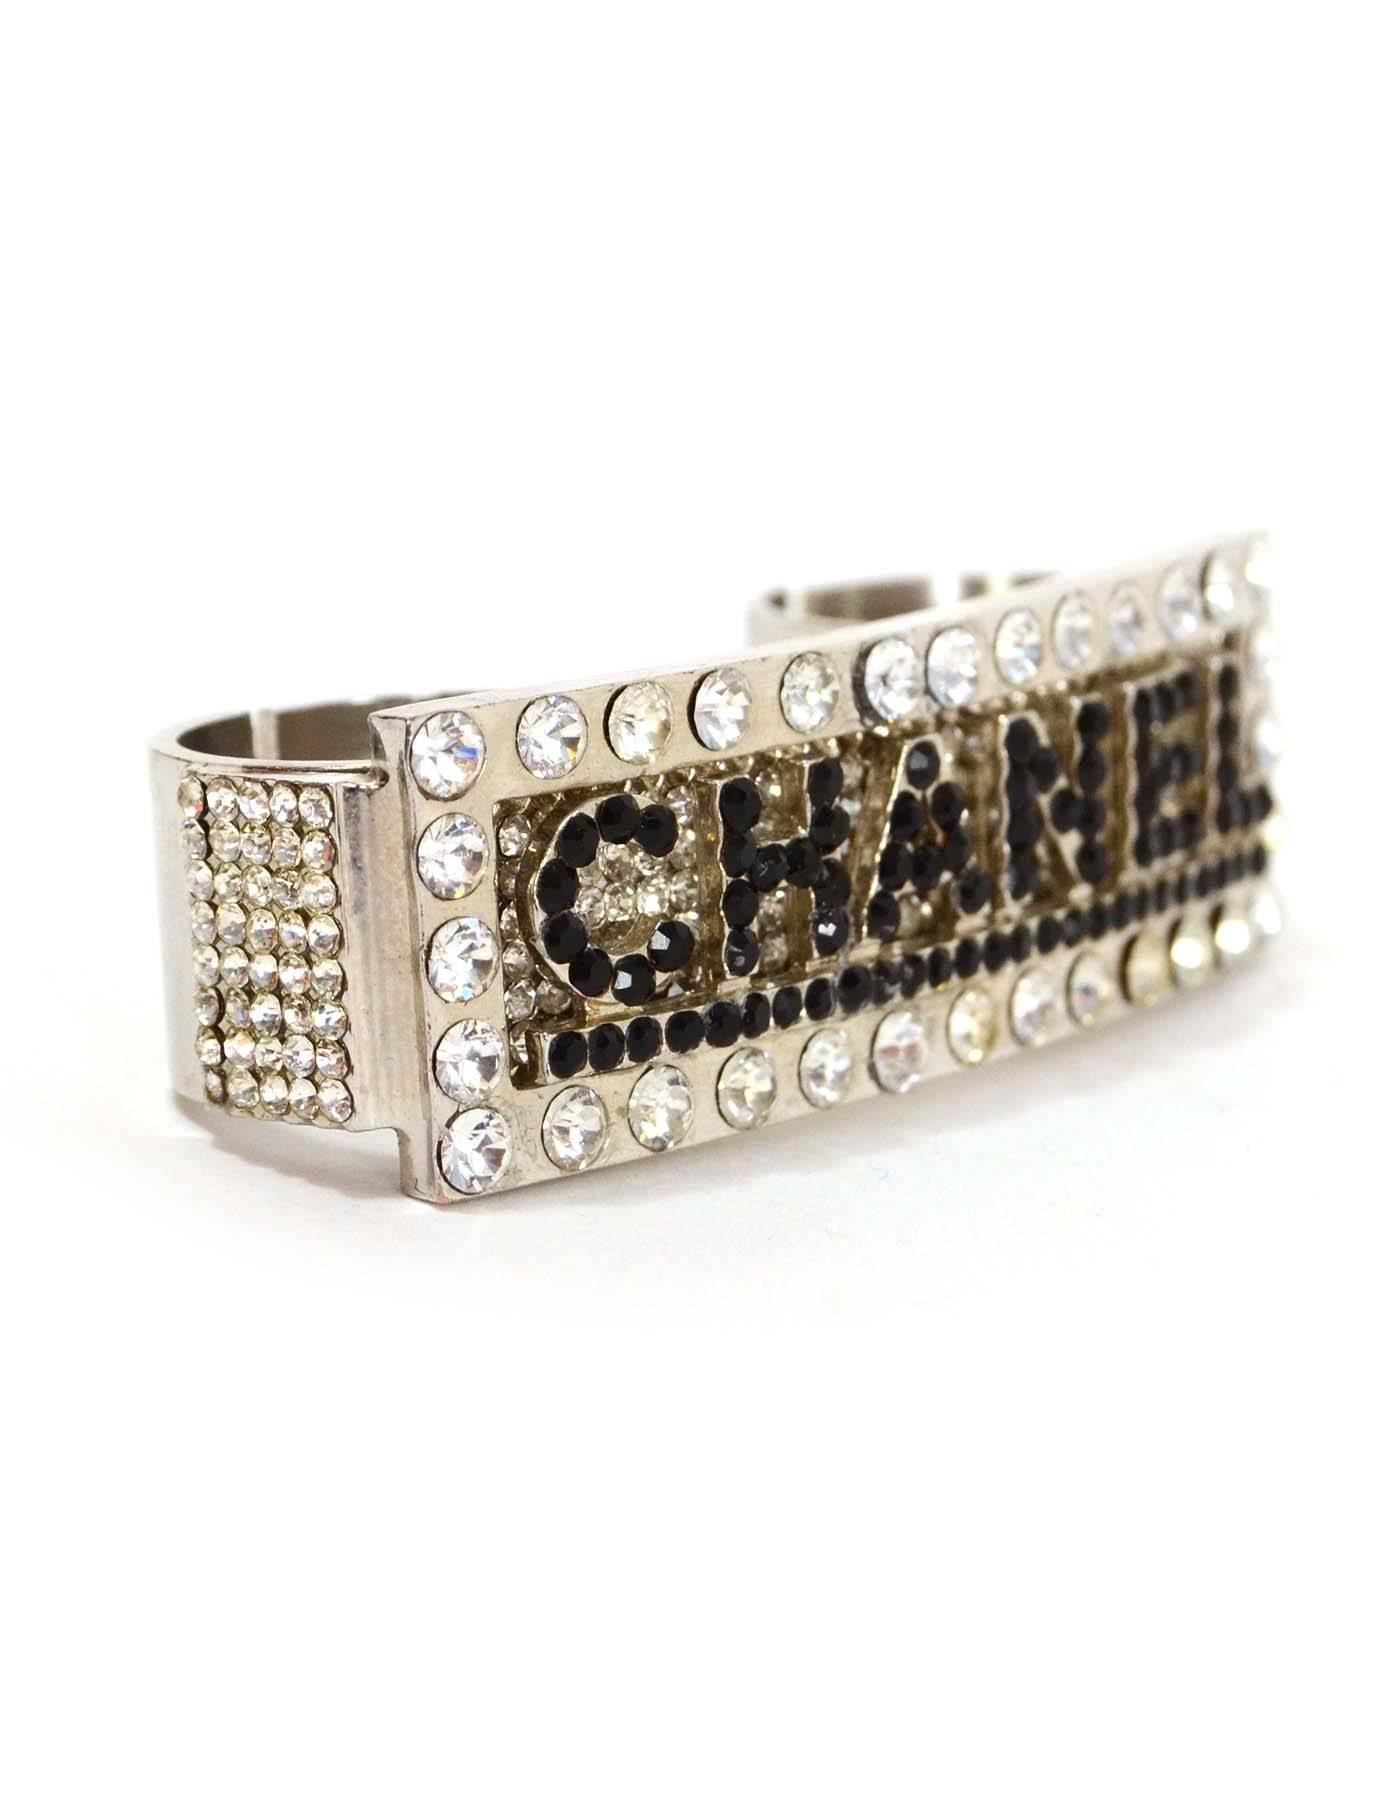 Chanel Black Crystal & Silver Double Knuckle Ring 
Features Chanel spelled out in black crystals on bar surrounded by clear crystals
Color: Silvertone, black and clear
Materials: Metal and crystal
Closure: None- open space on ring bands to